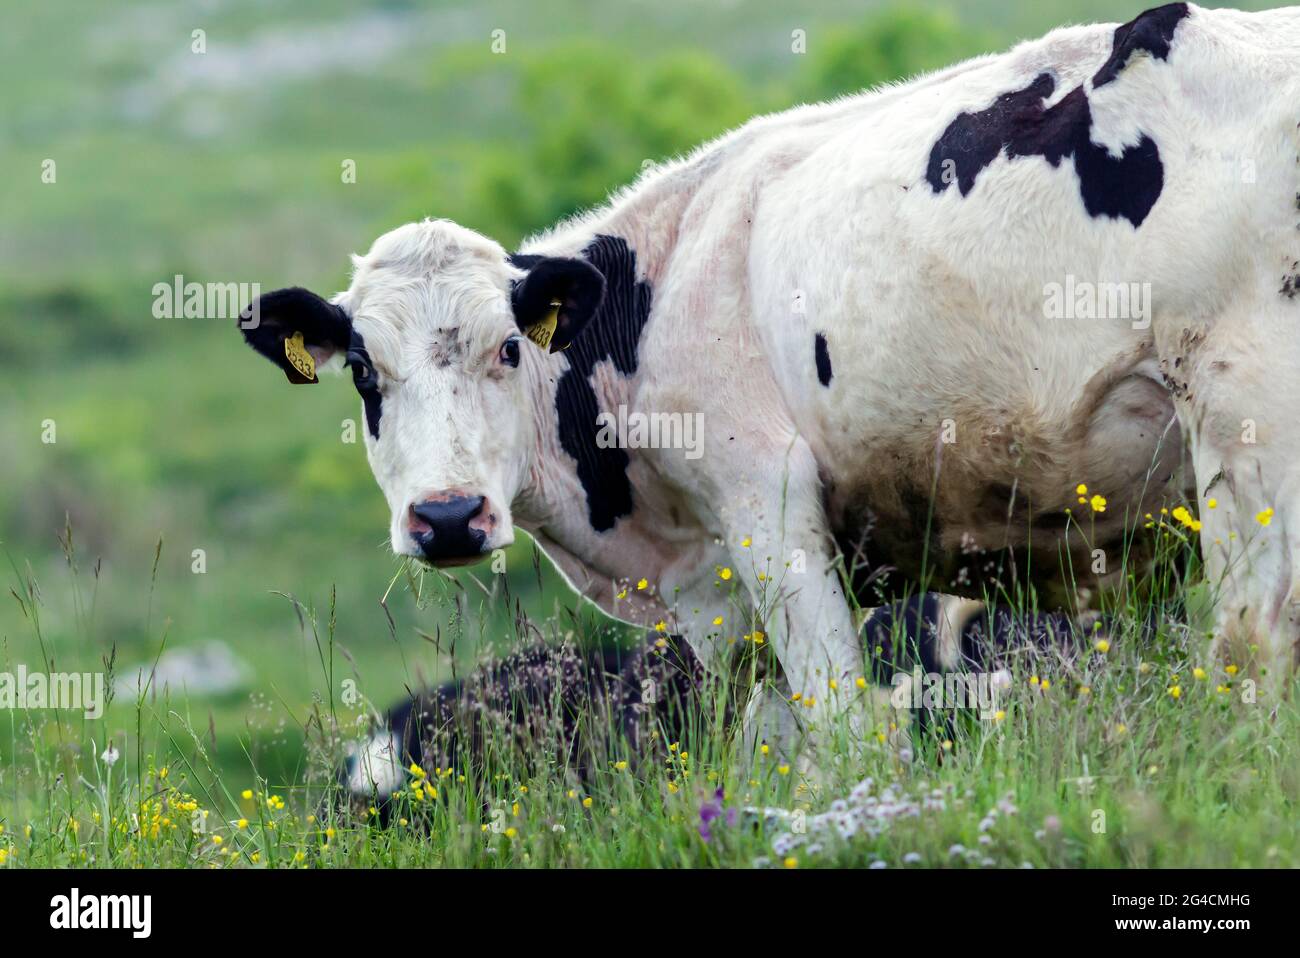 A dairy cow Stock Photo